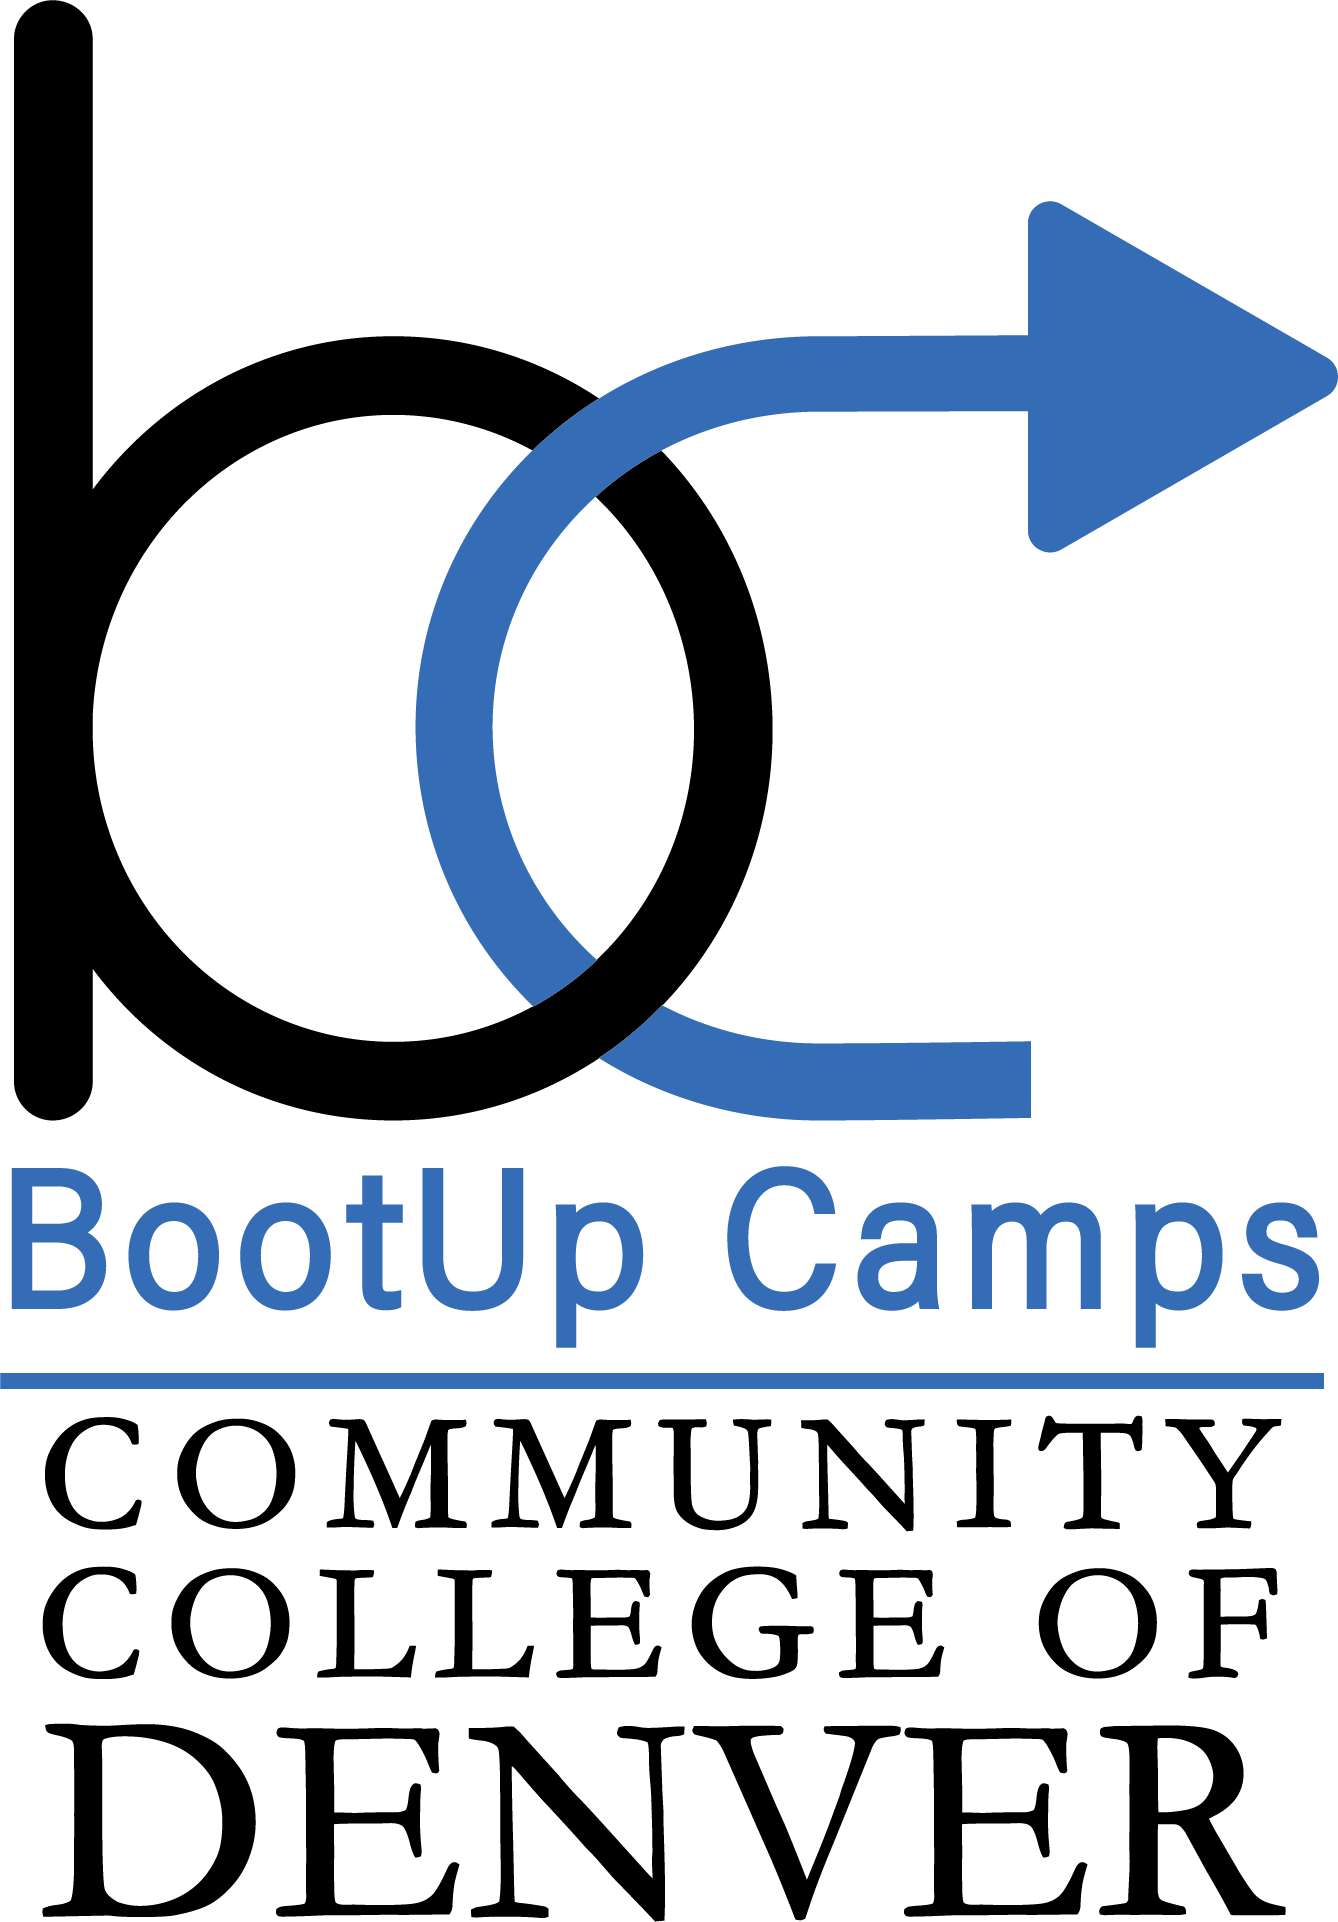 bootup camps logo